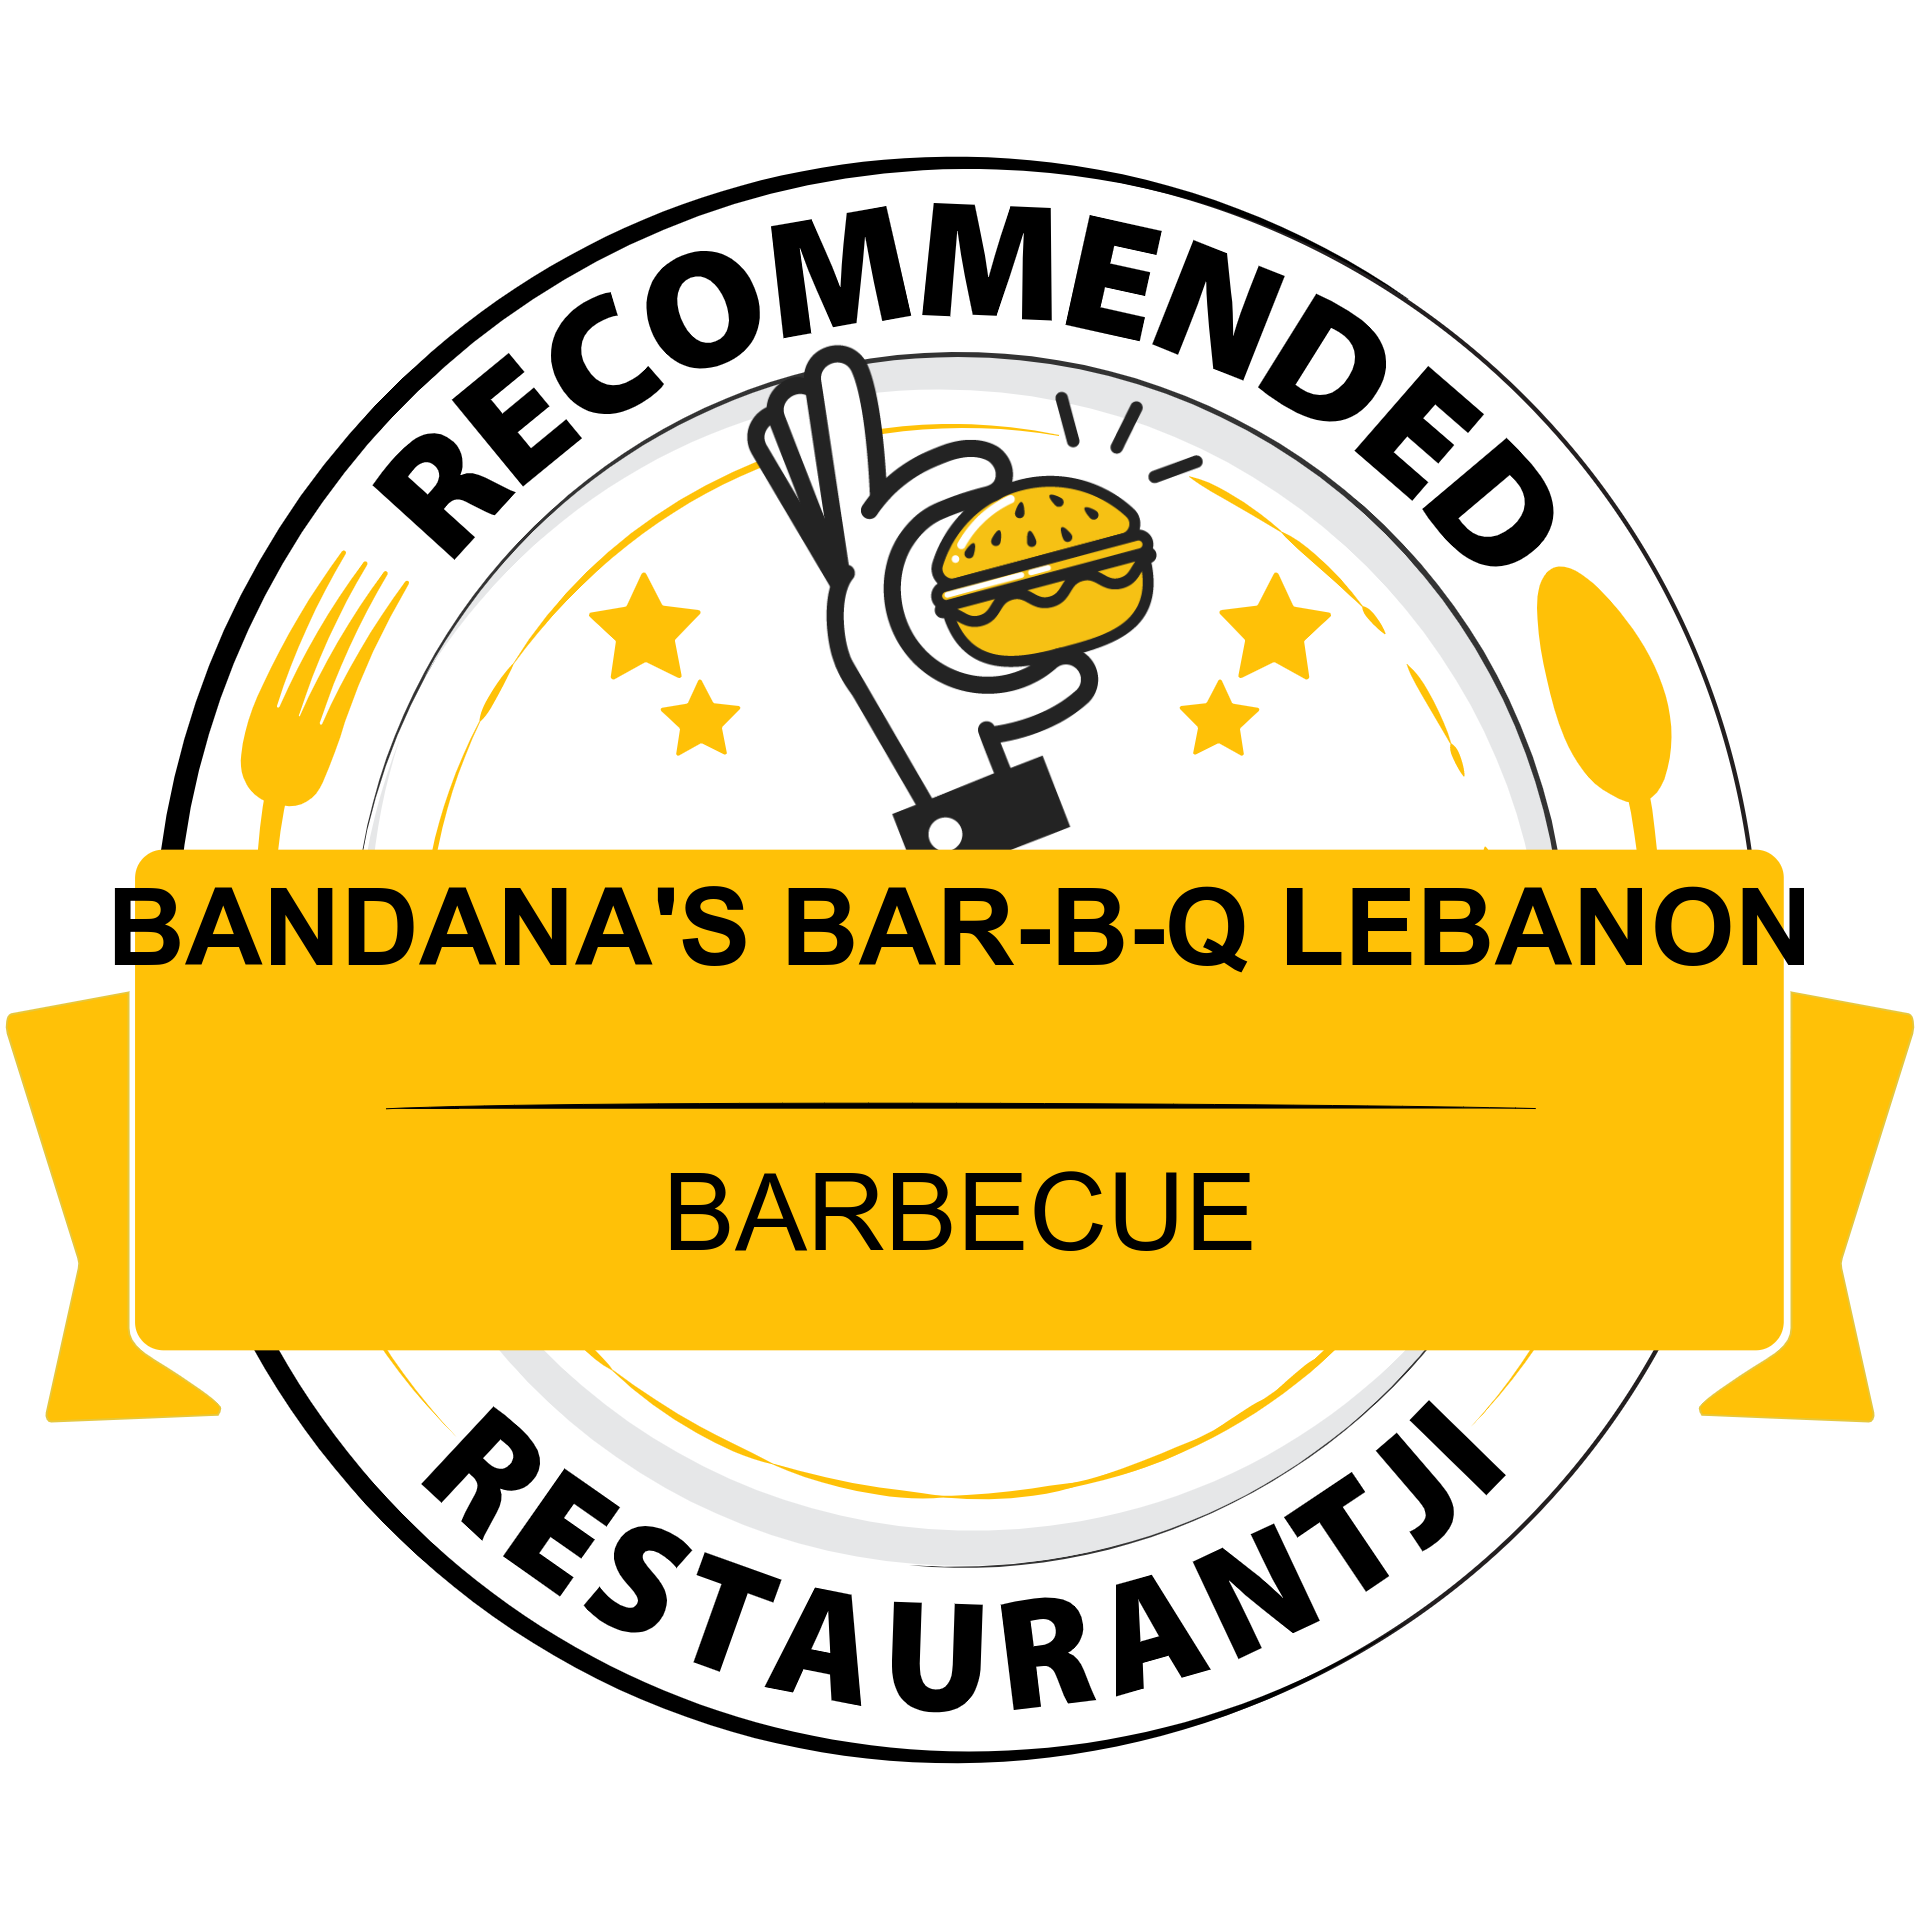 Bandana's Bar-B-Q Lebanon has earned accolades from Restaurantji - your dining guide to local food gems.